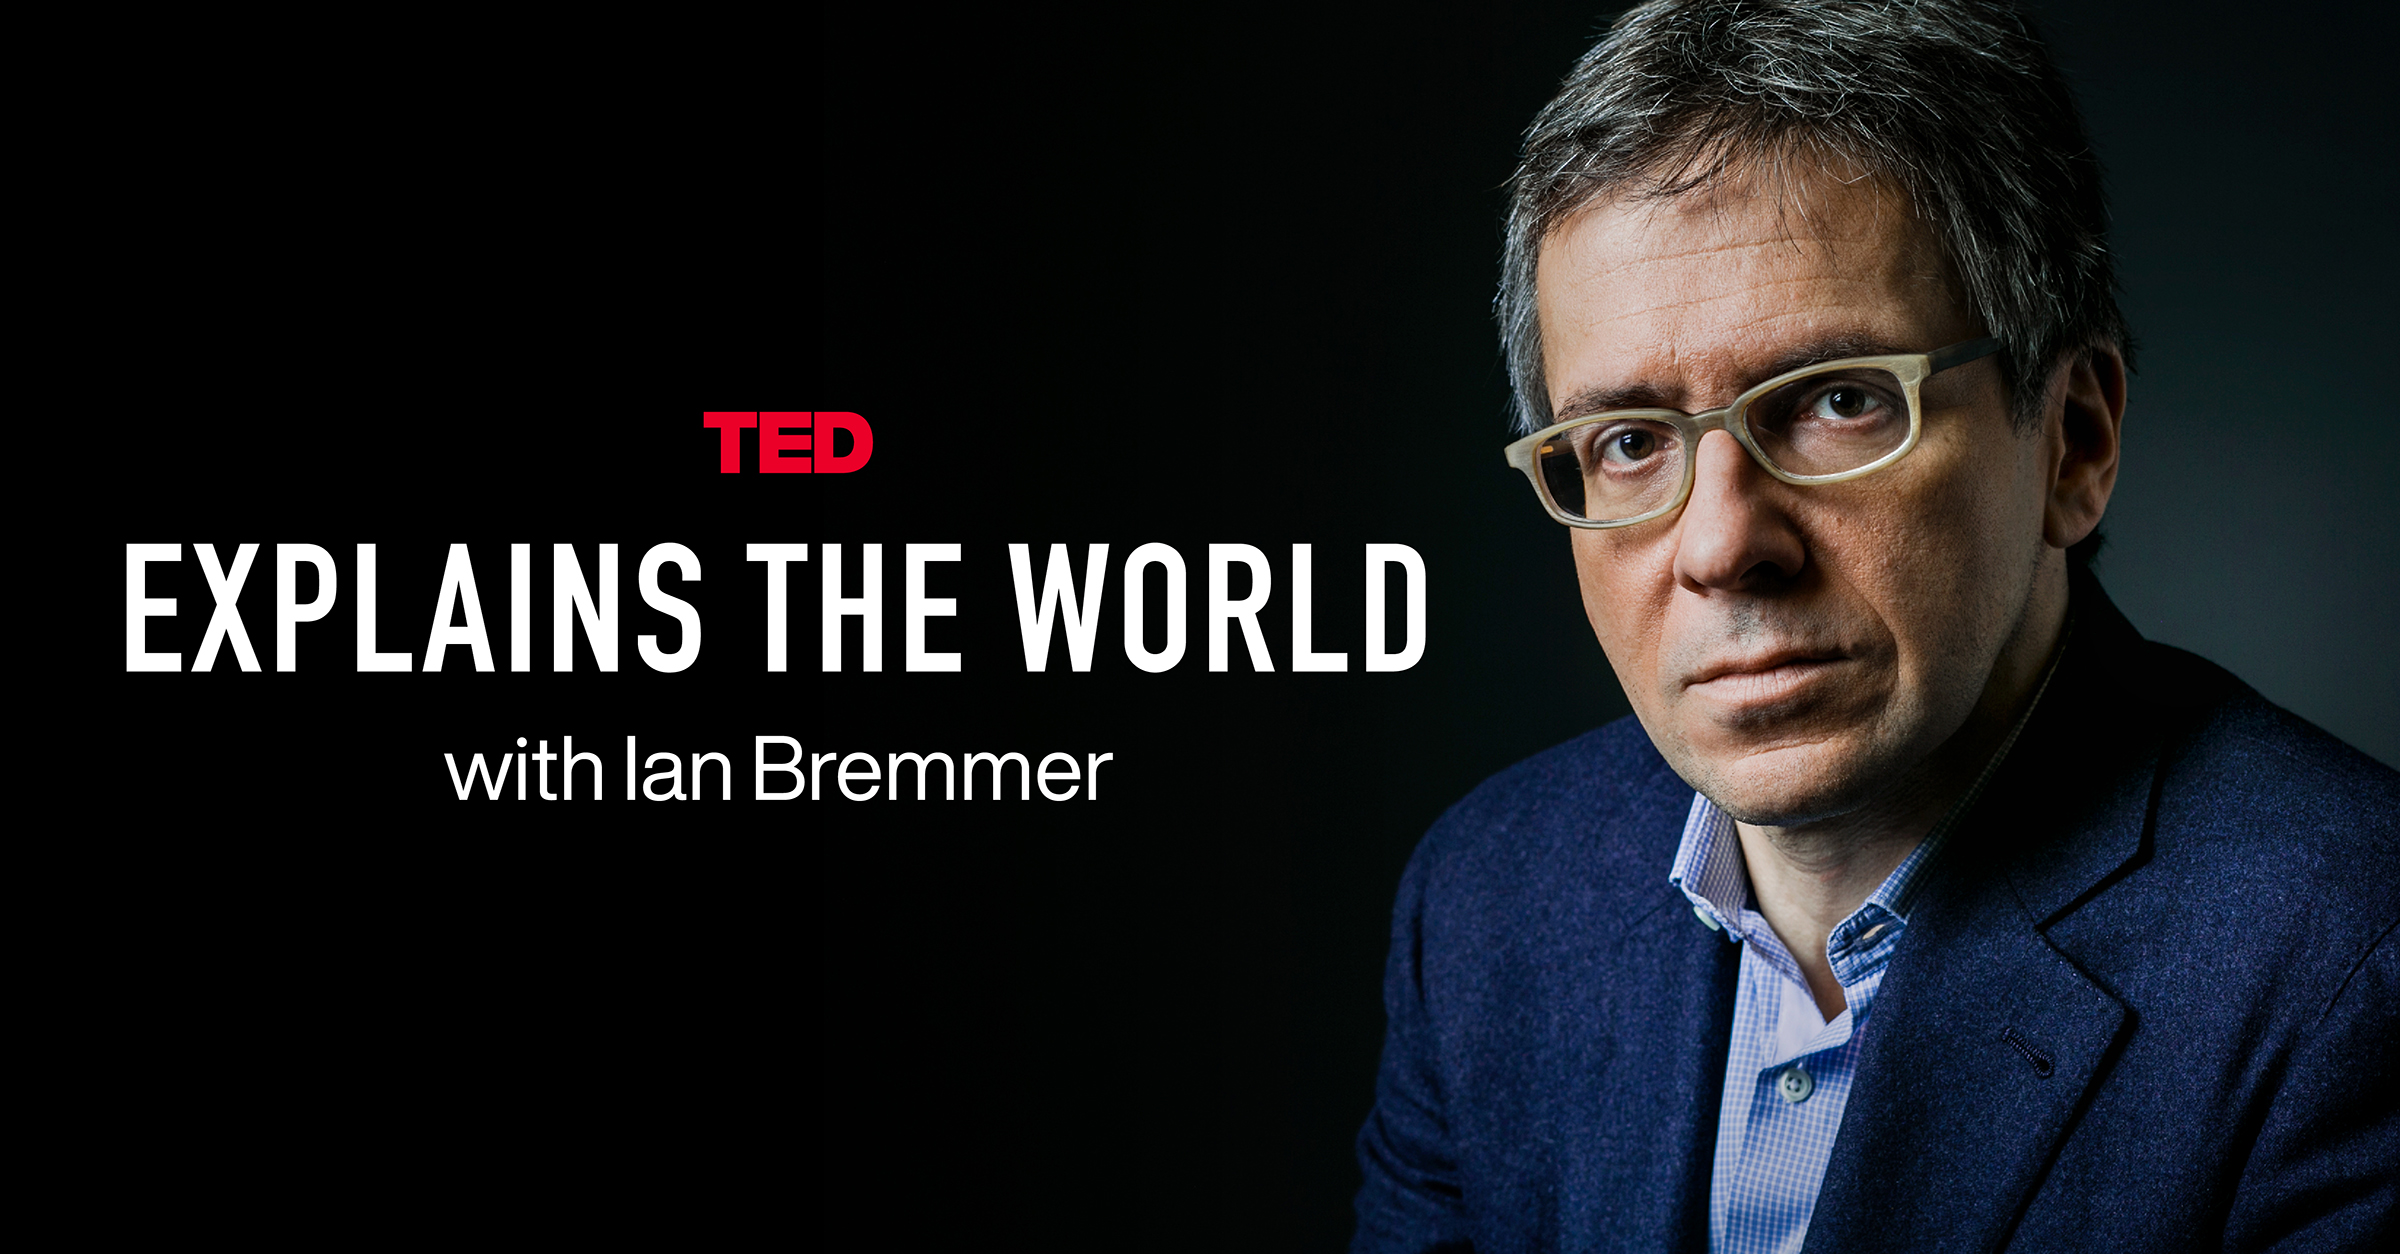 TED Explains the World with Ian Bremmer